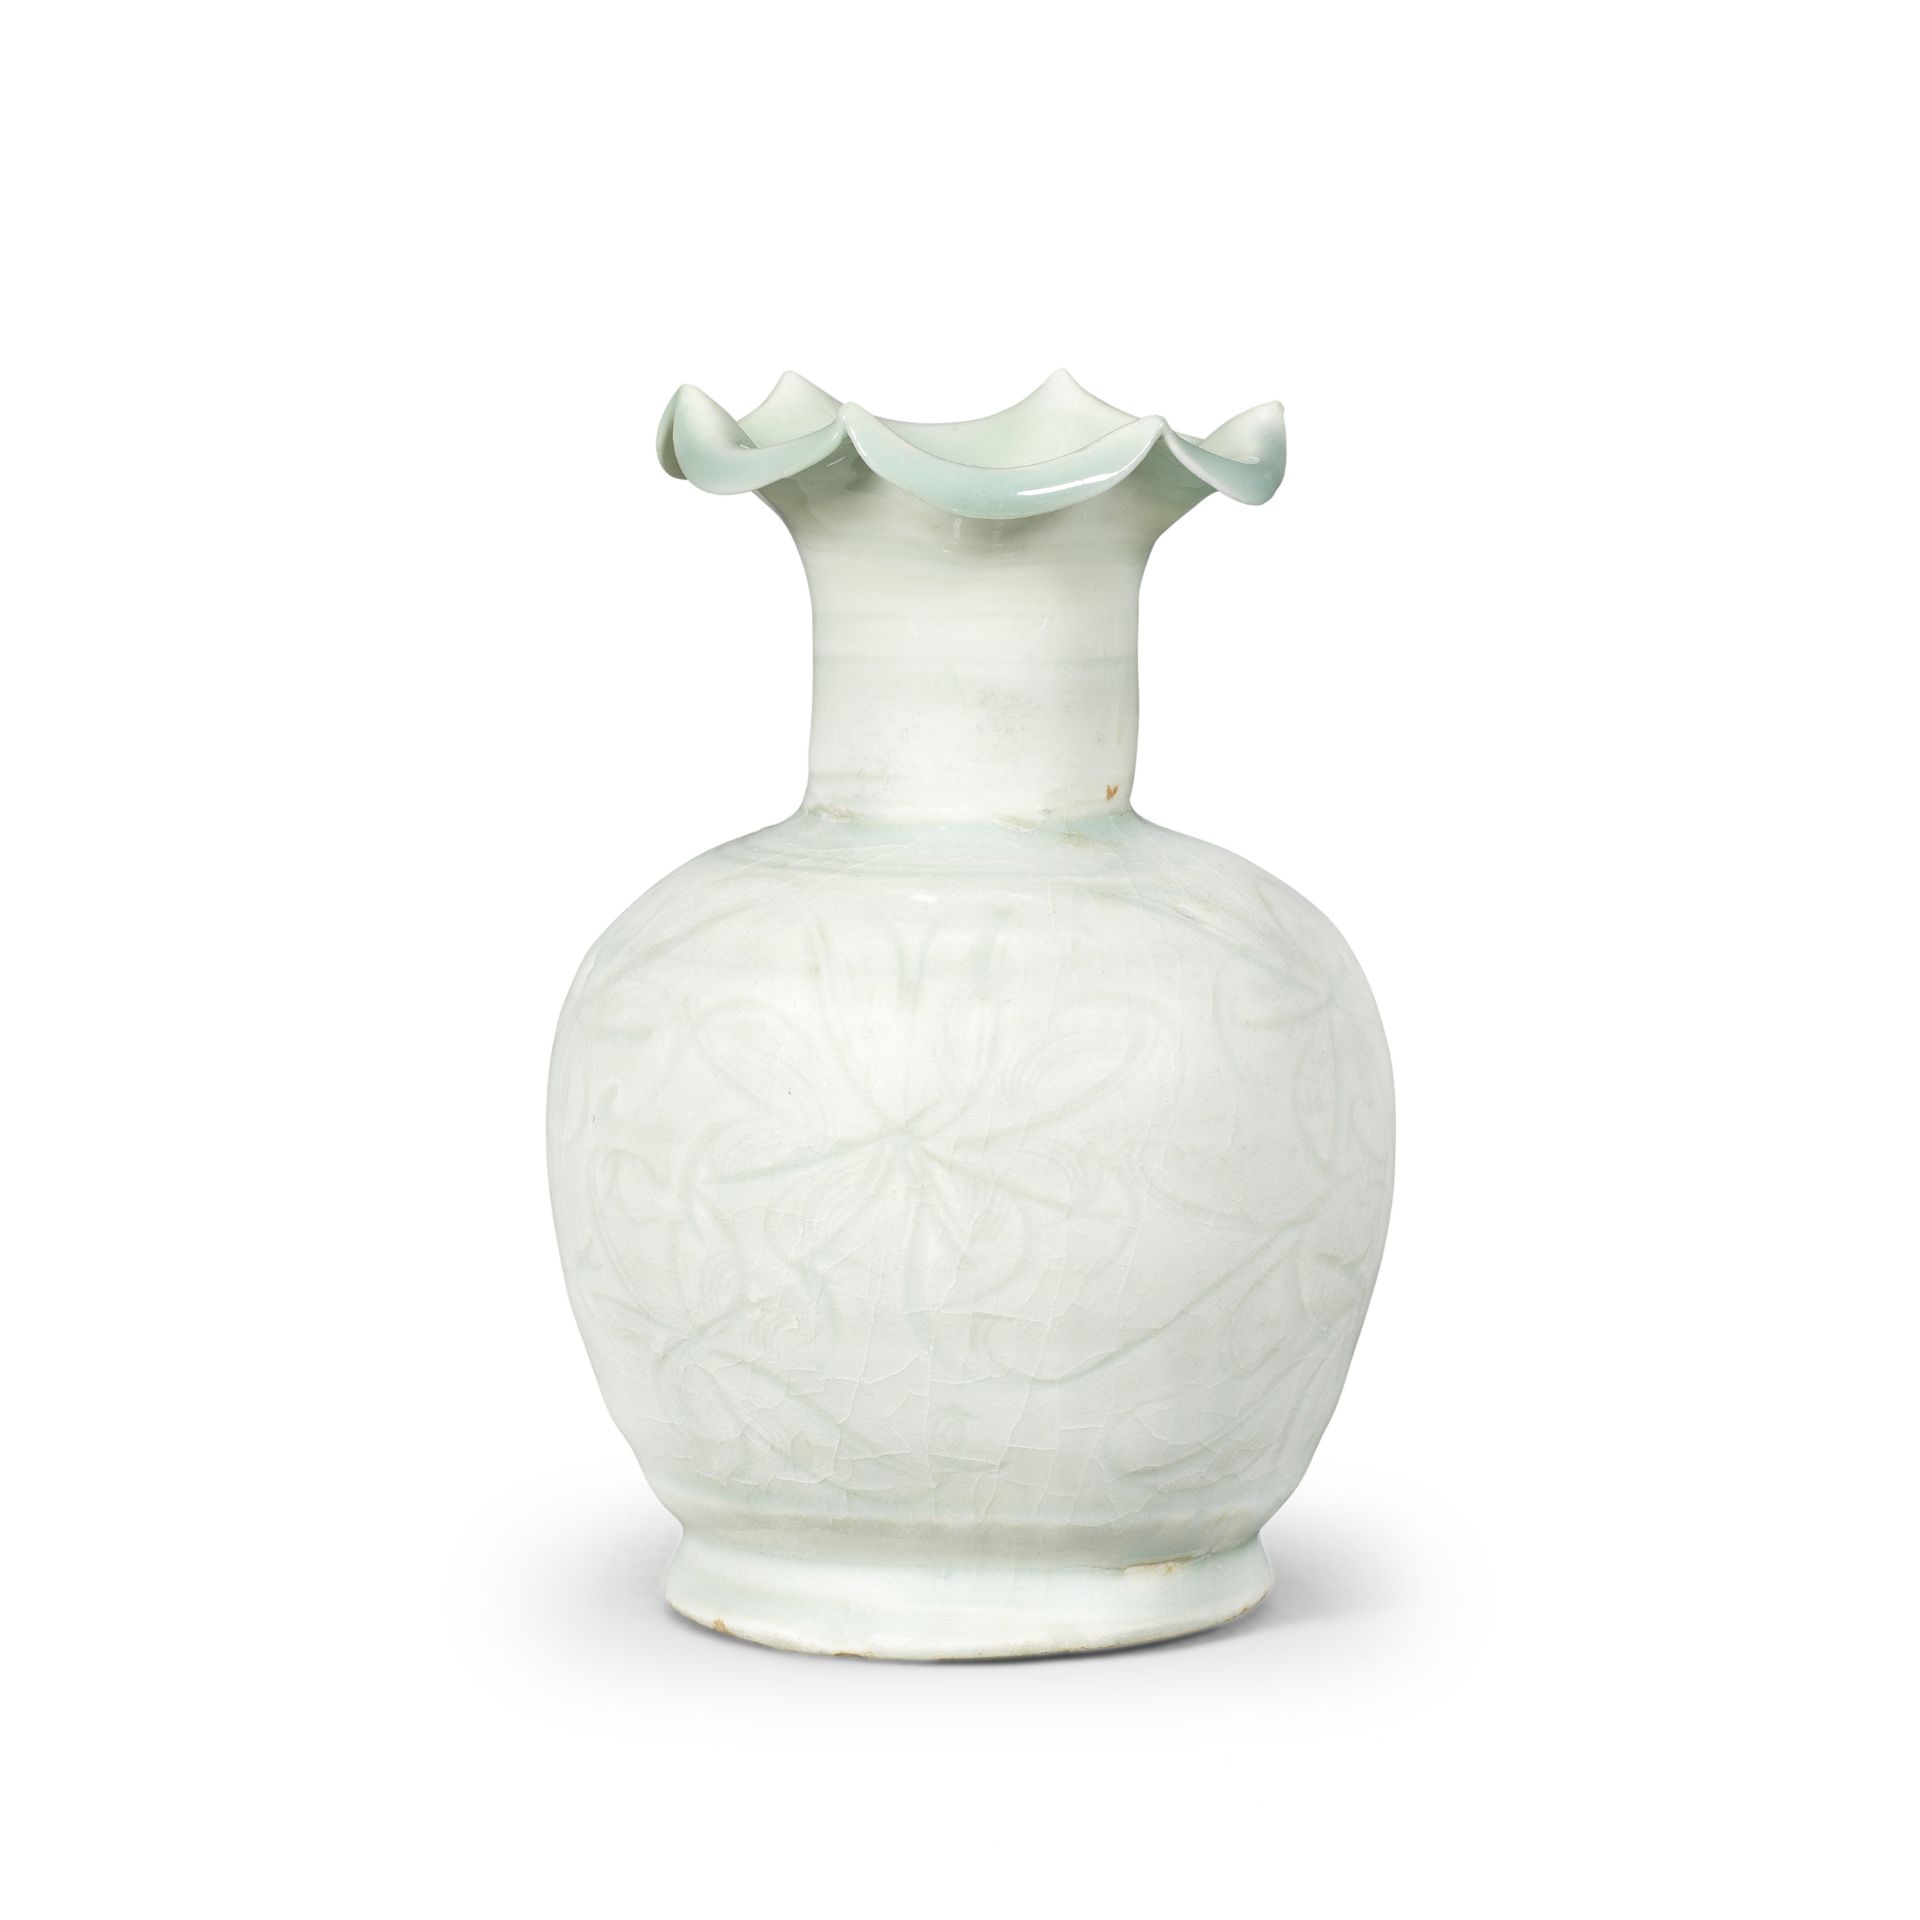 A QINGBAI INCISED FLORAL VASE Southern Song Dynasty